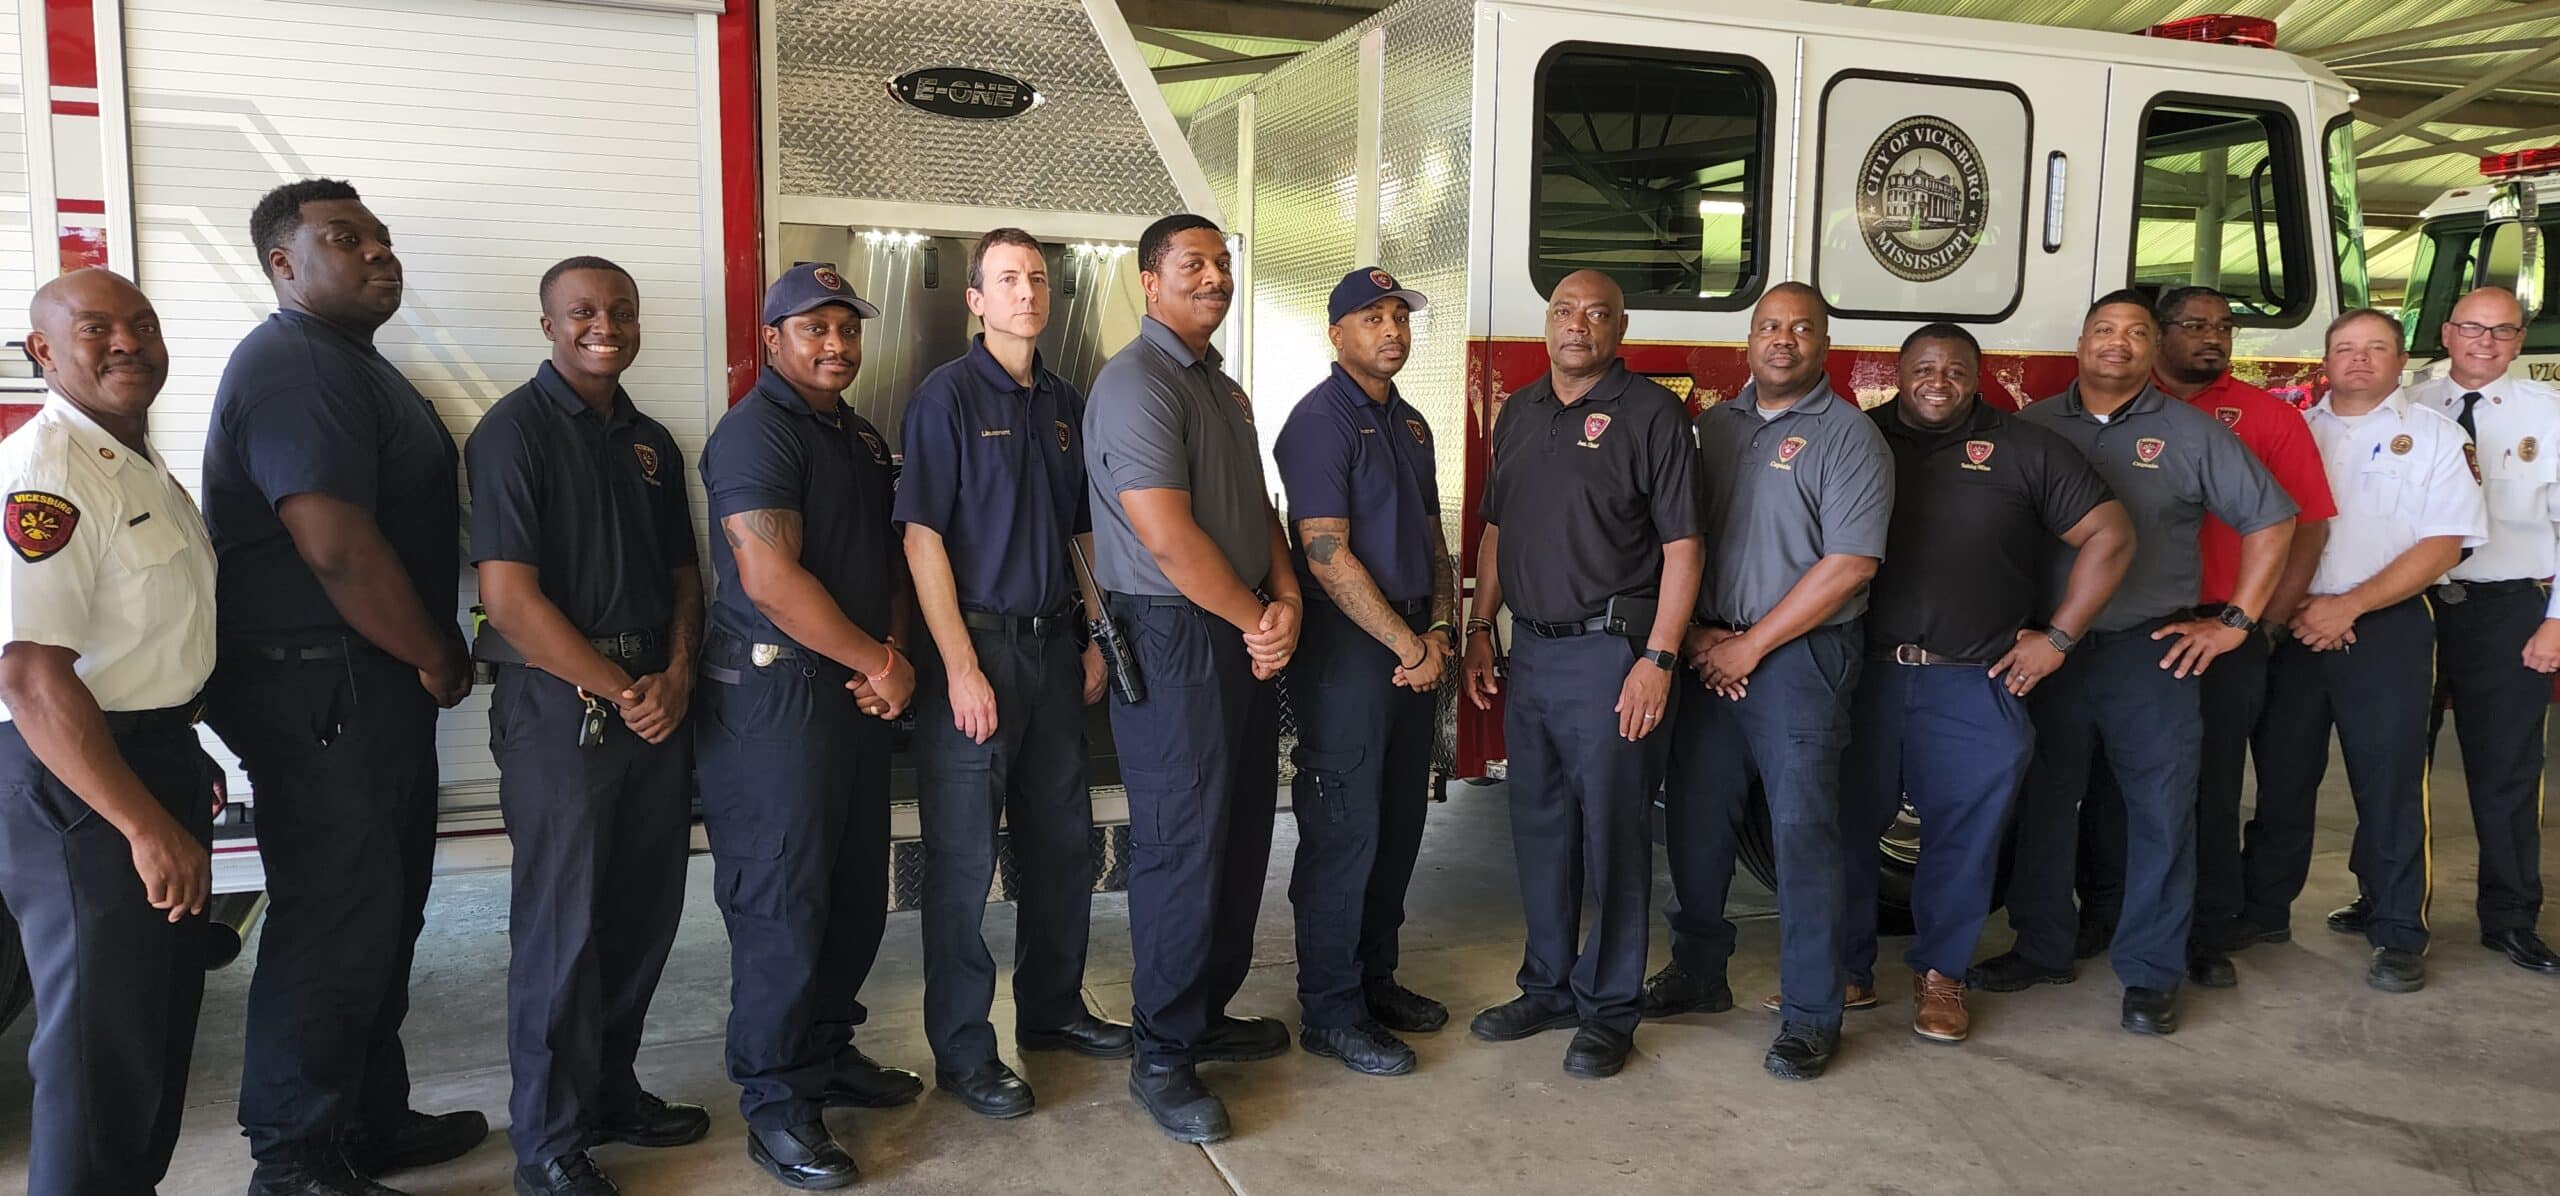 Firefighters with their new truck. Photo by David Day